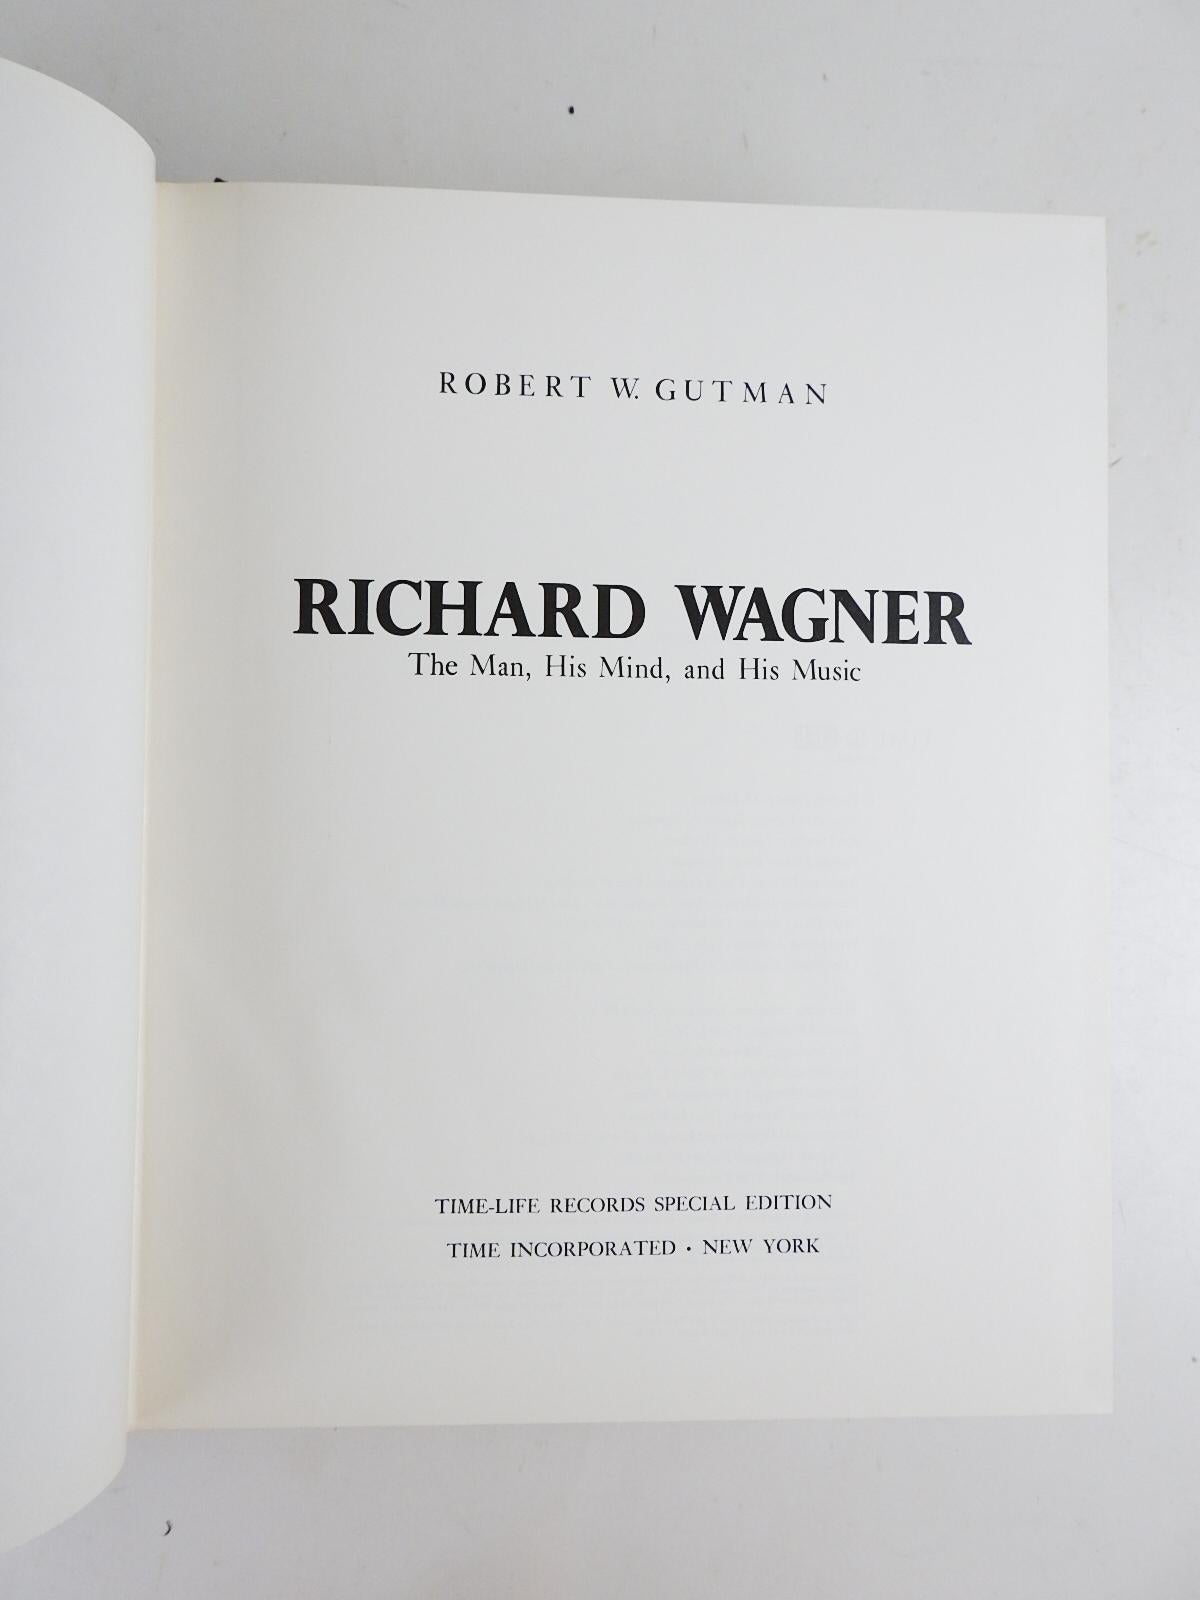 Richard Wagner: The Man, His Mind and His Music; Ring Resounding; The Perfect Wagnerite: A Commentary on Wagner's Ring Cycle by Robert W. Gutman; John Culshaw; Bernard Shaw, 
Published by Time-Life Records Special Edition, 1972, 3 volumes.  Black